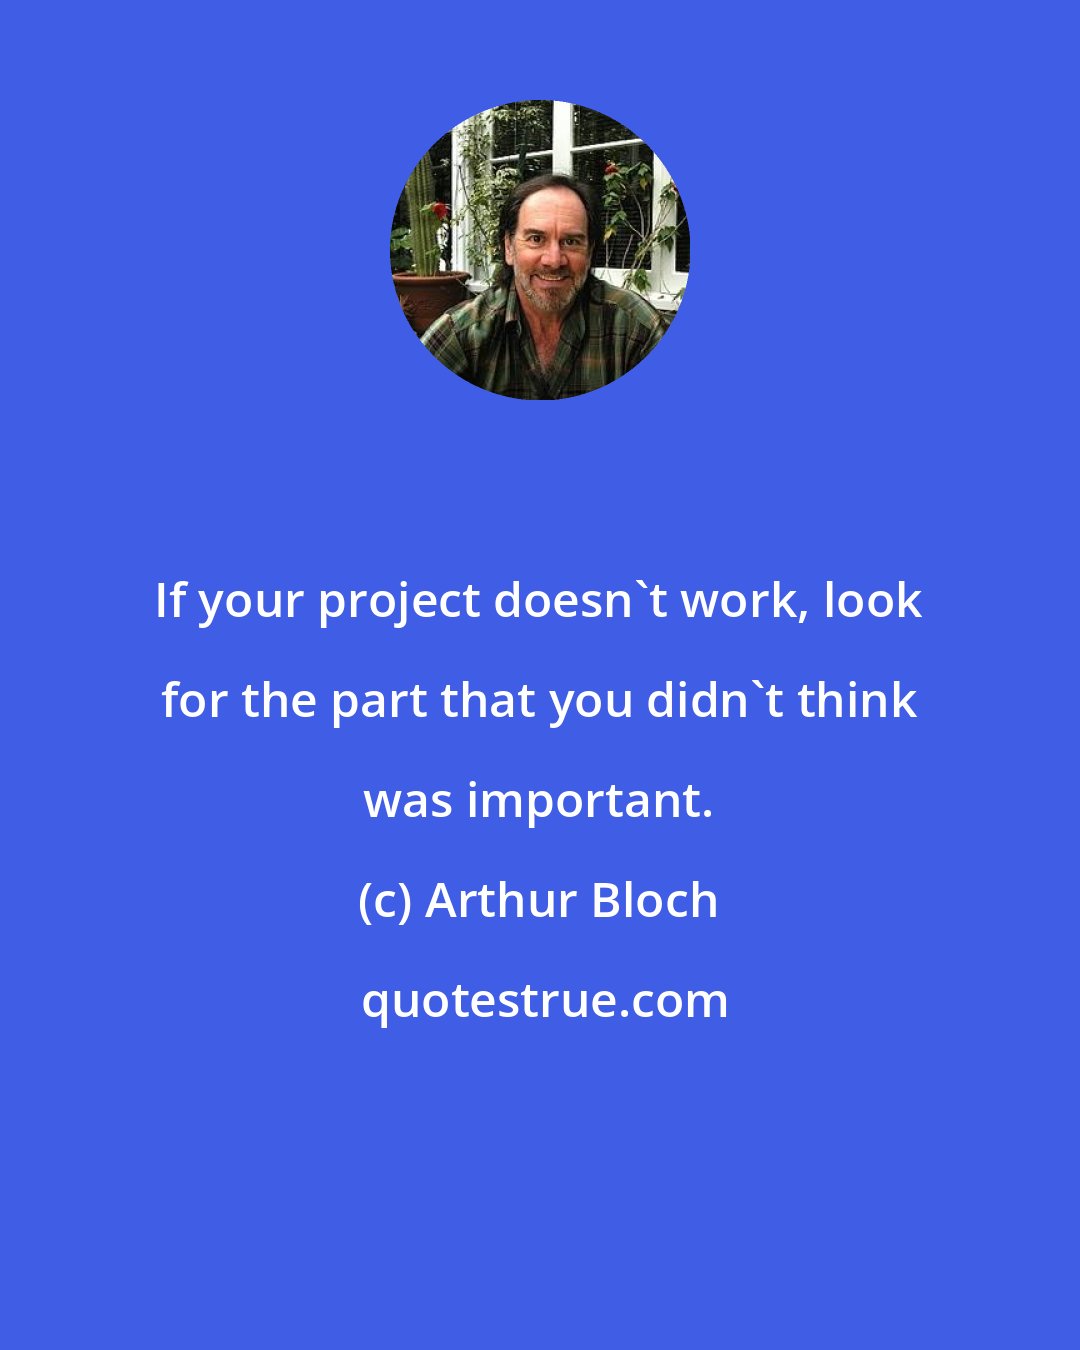 Arthur Bloch: If your project doesn't work, look for the part that you didn't think was important.